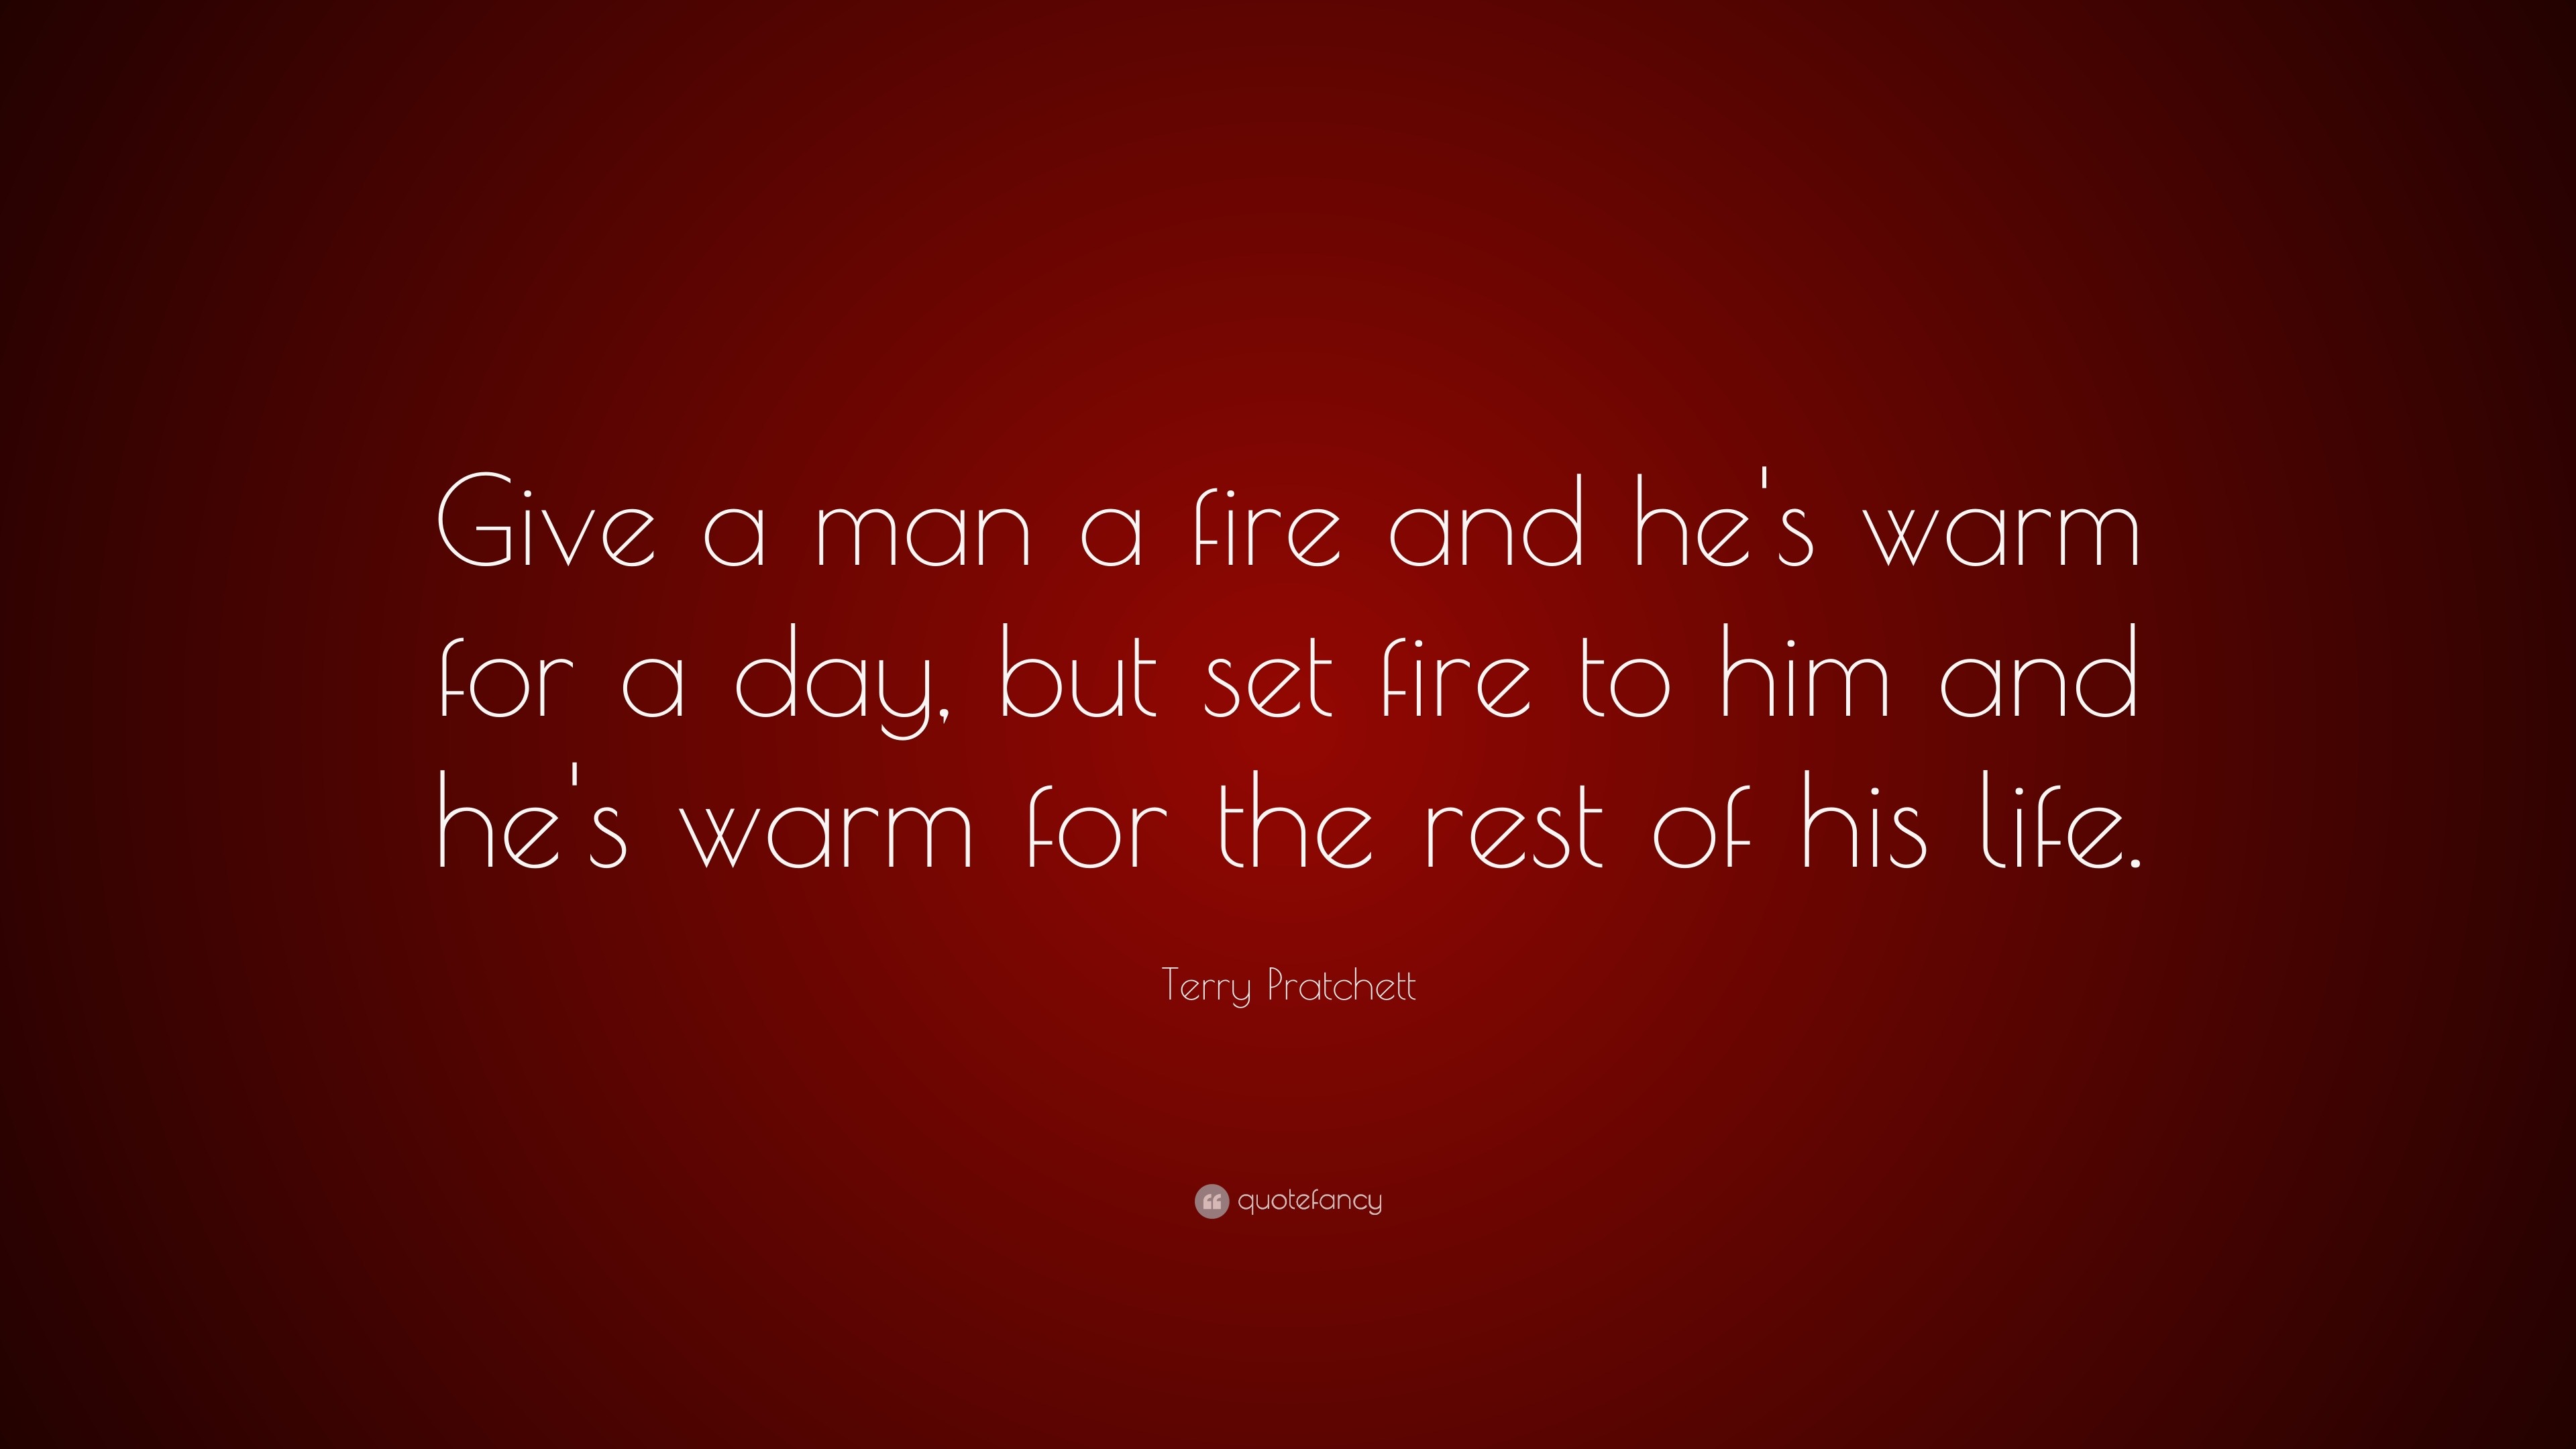 Terry Pratchett Quote: “Give a man a fire and he's warm for a day, but set